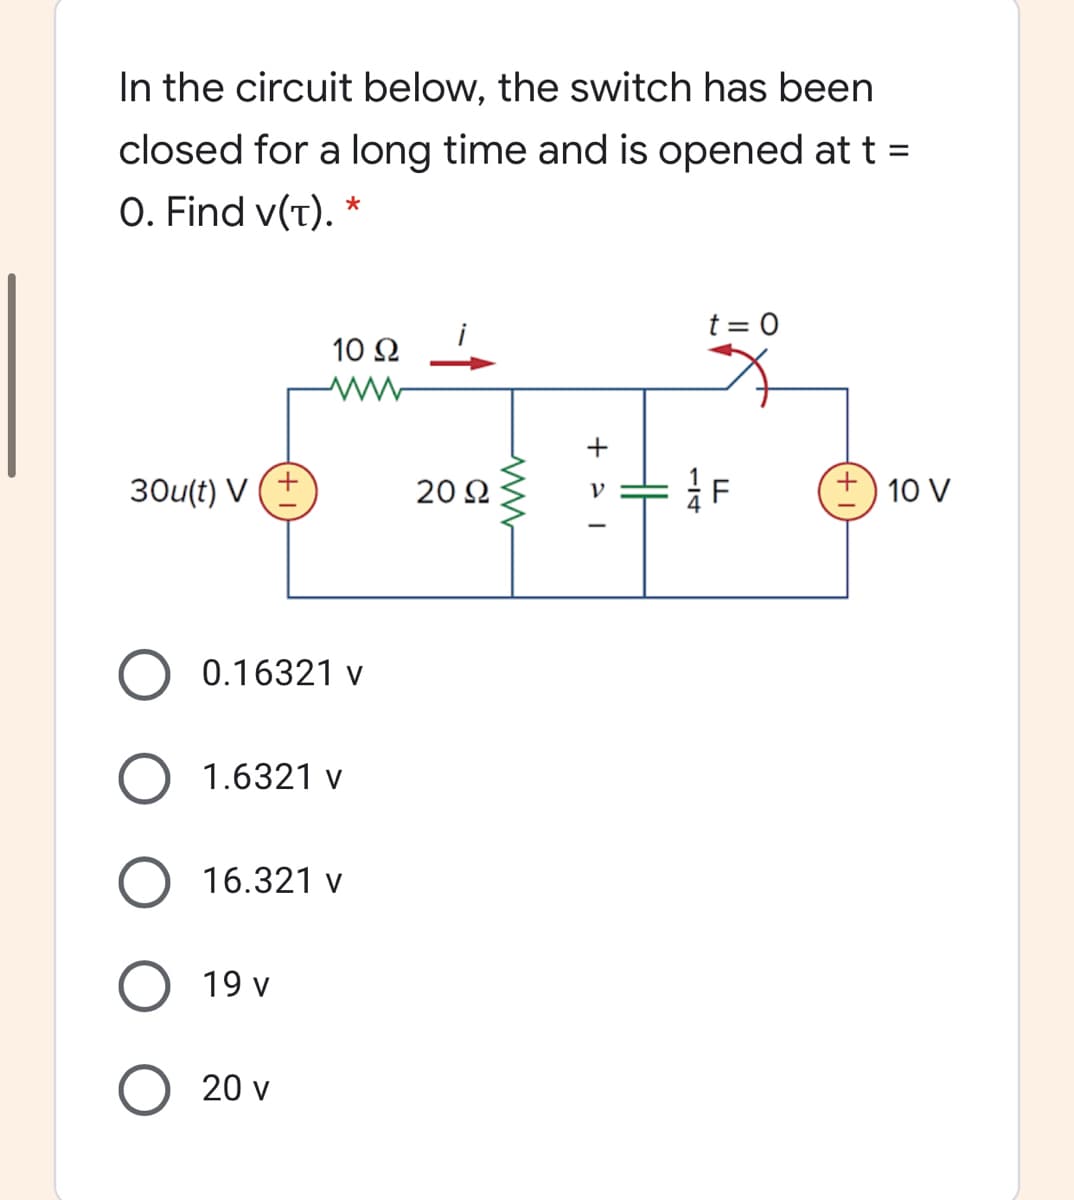 In the circuit below, the switch has been
closed for a long time and is opened at t =
%3D
O. Find v(T).
t = 0
10 Ω -
+
30u(t) V
20 2
10 V
0.16321 v
1.6321 v
16.321 v
19 v
20 v
H
